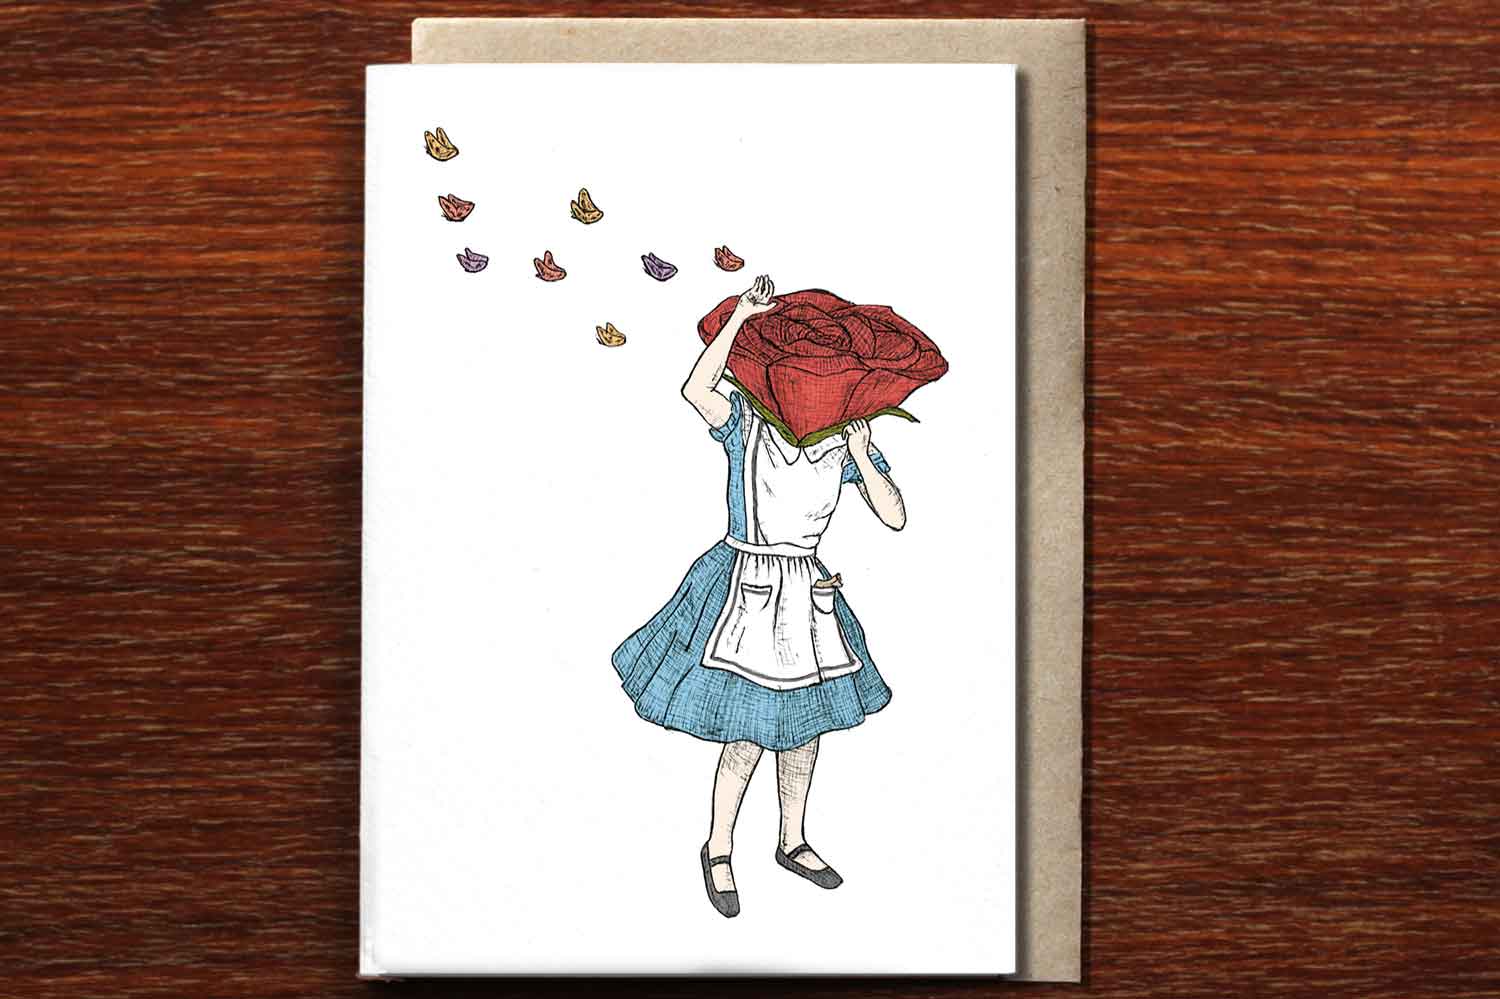 Hand illustrated Alice in Wonderland themed greeting card